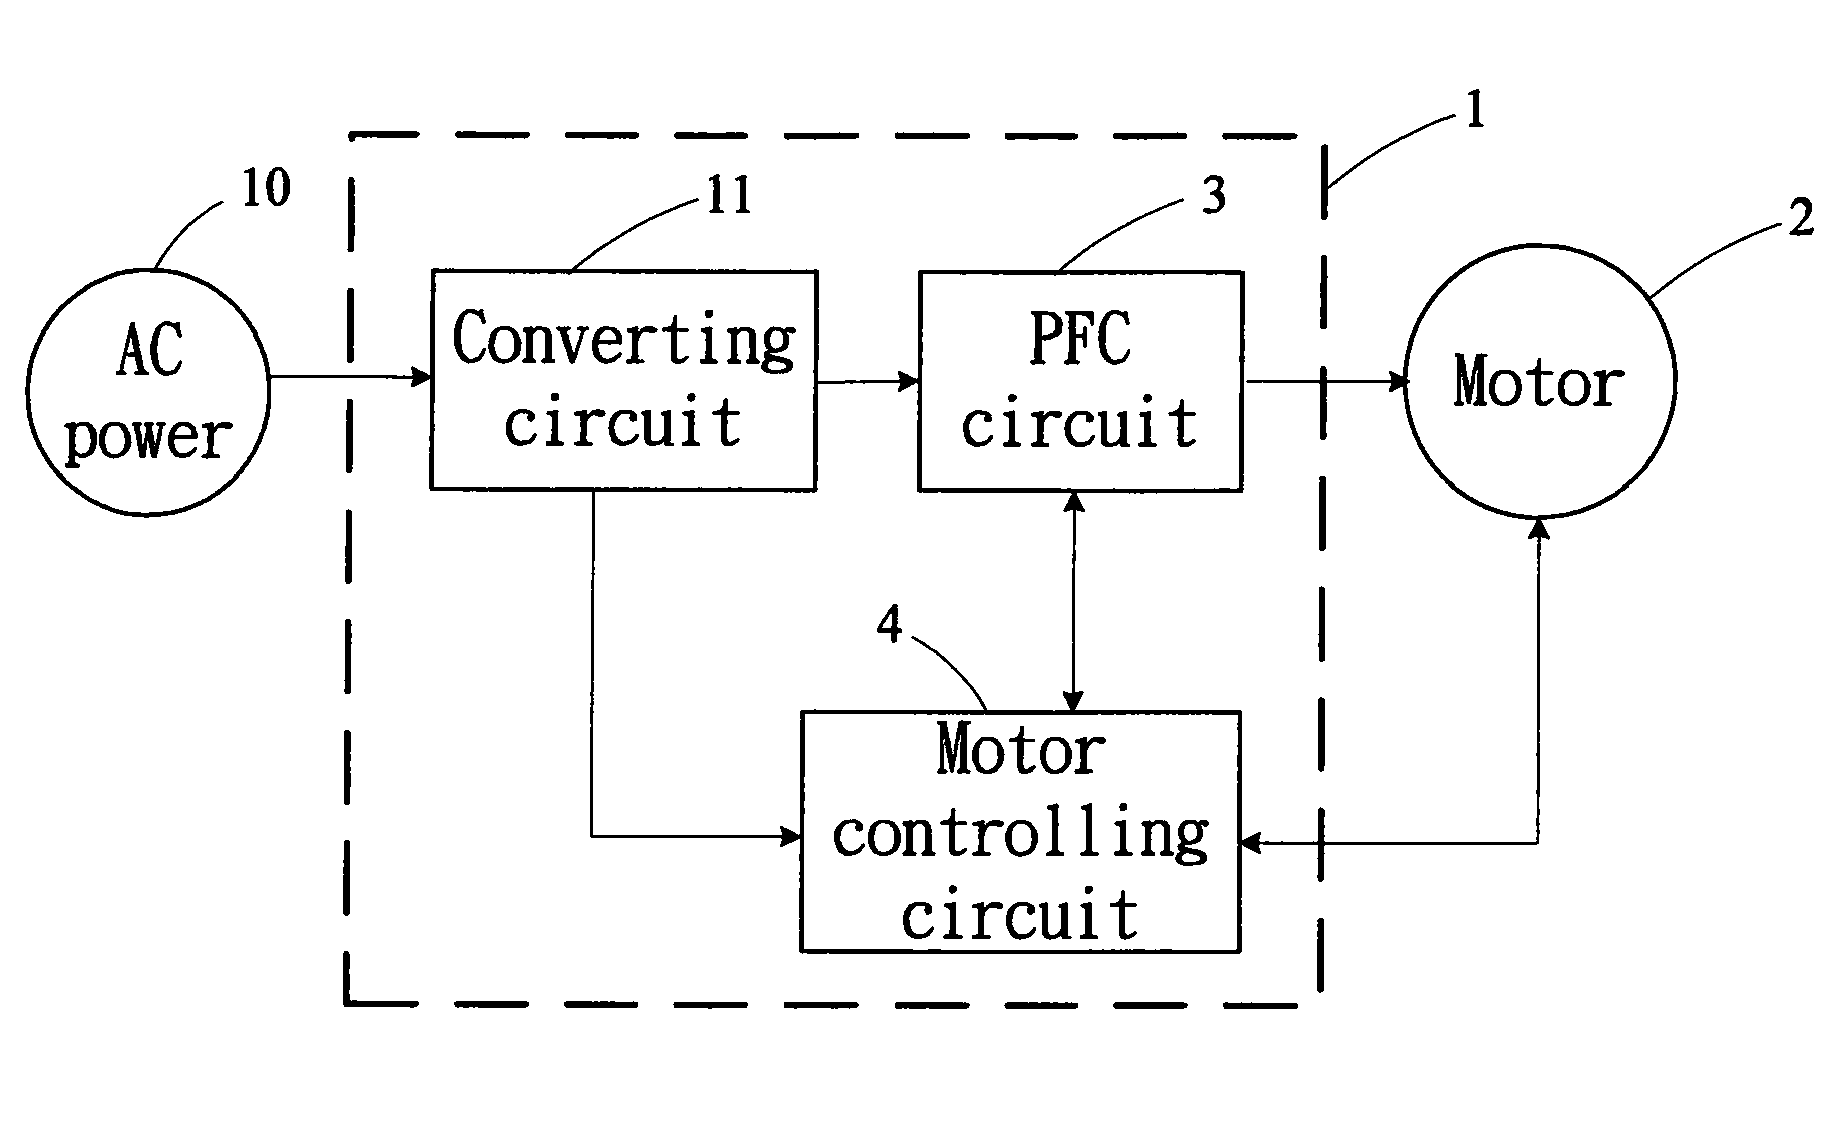 Fan and motor control device